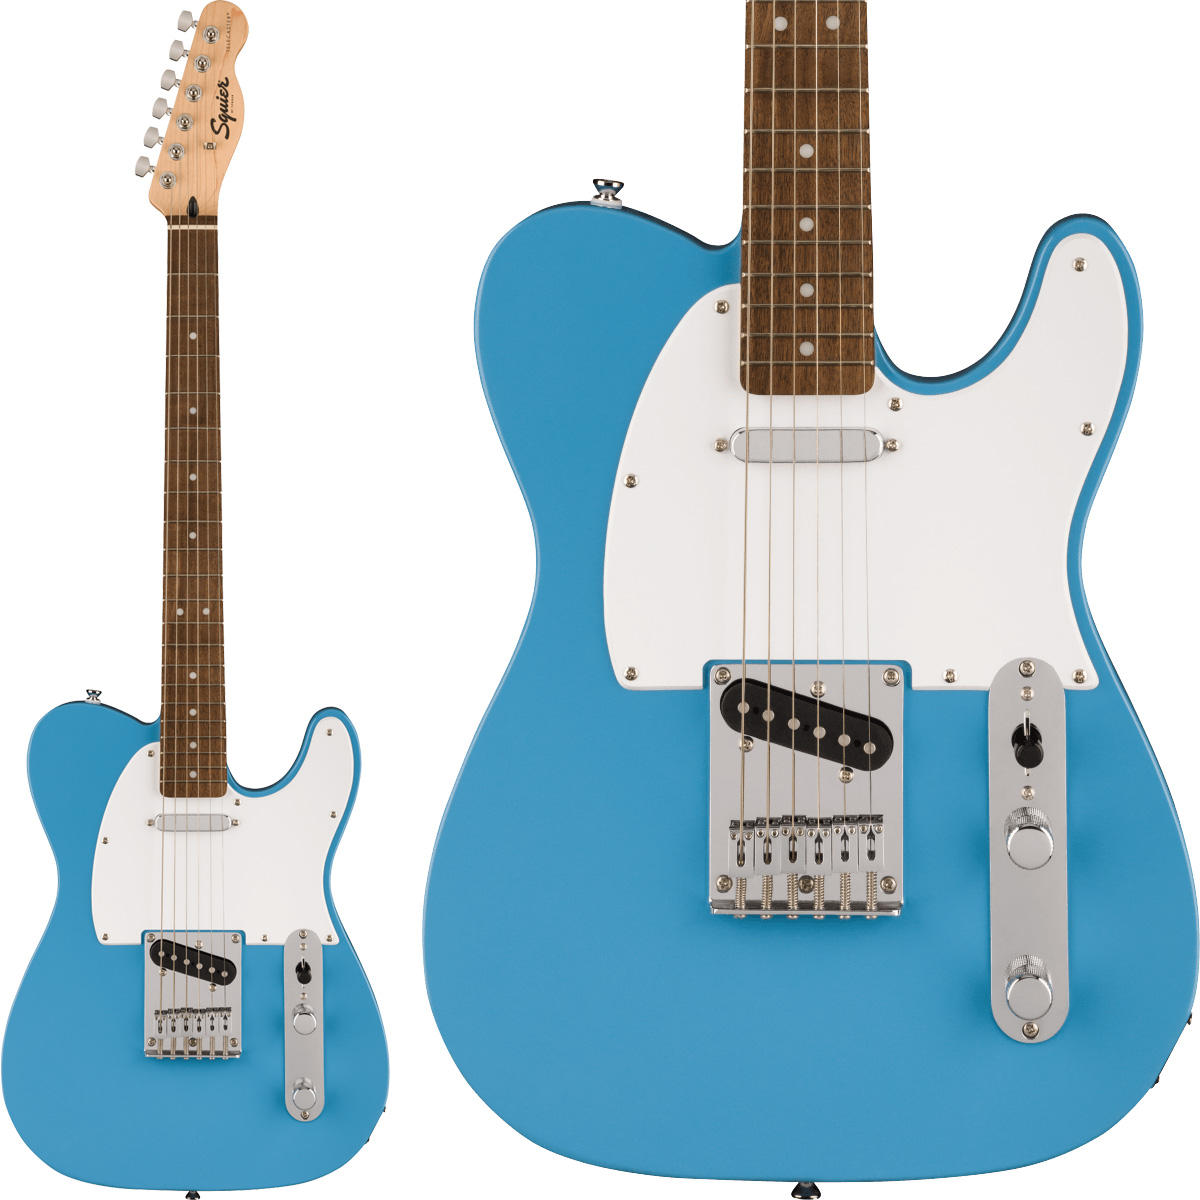 Squier by Fender SONIC TELECASTER Laurel Fingerboard White Pickguard  California Blue テレキャスター エレキギターソニック スクワイヤー / スクワイア 【 横浜ビブレ店 】